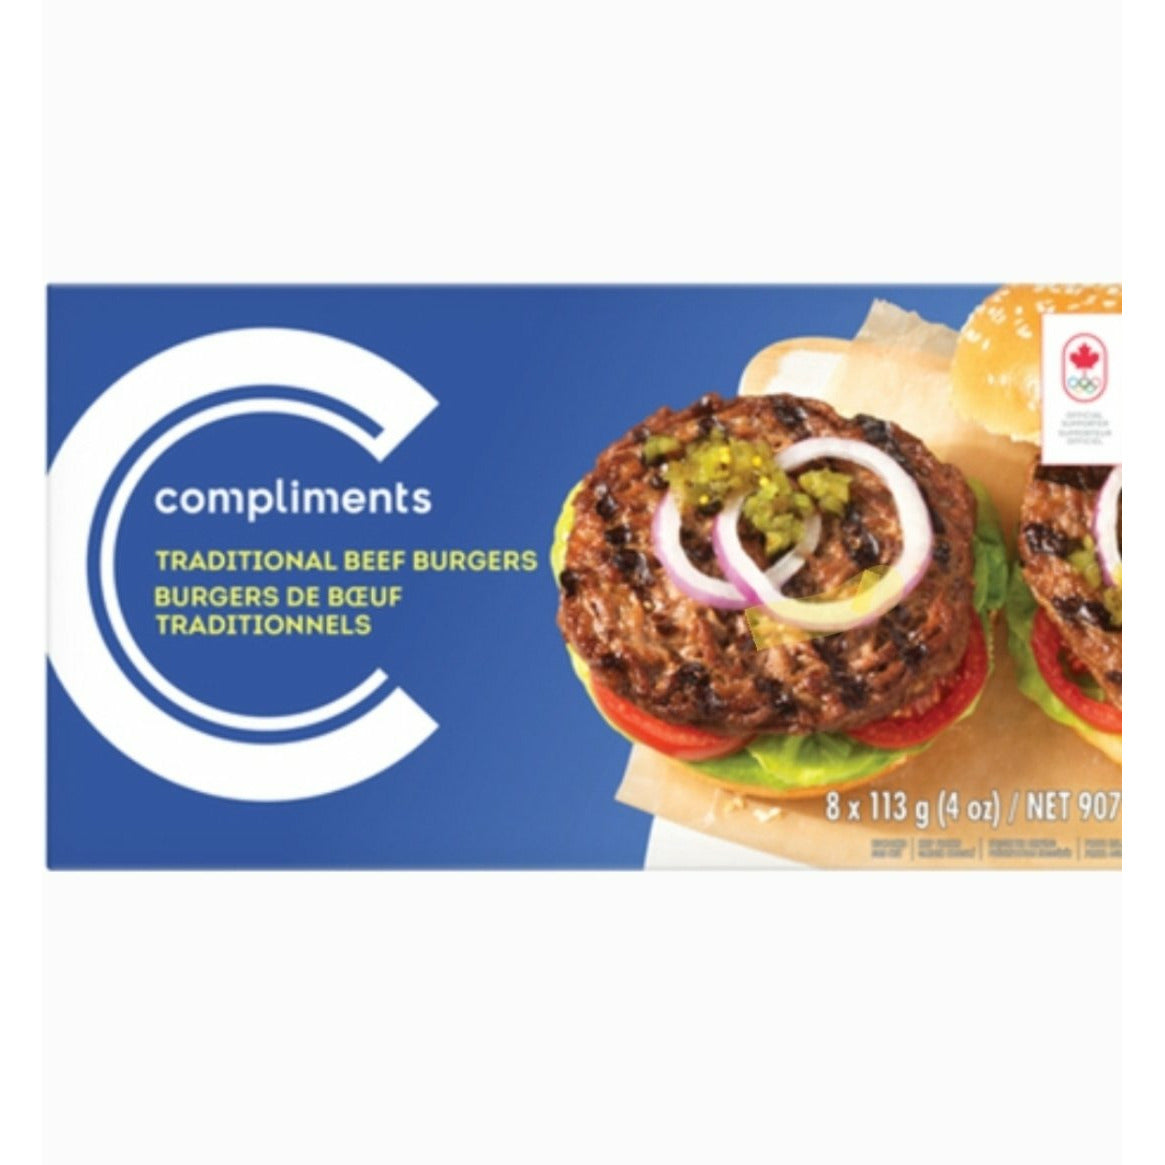 Compliments Burgers, Beef Traditional, 8 pack, 907g